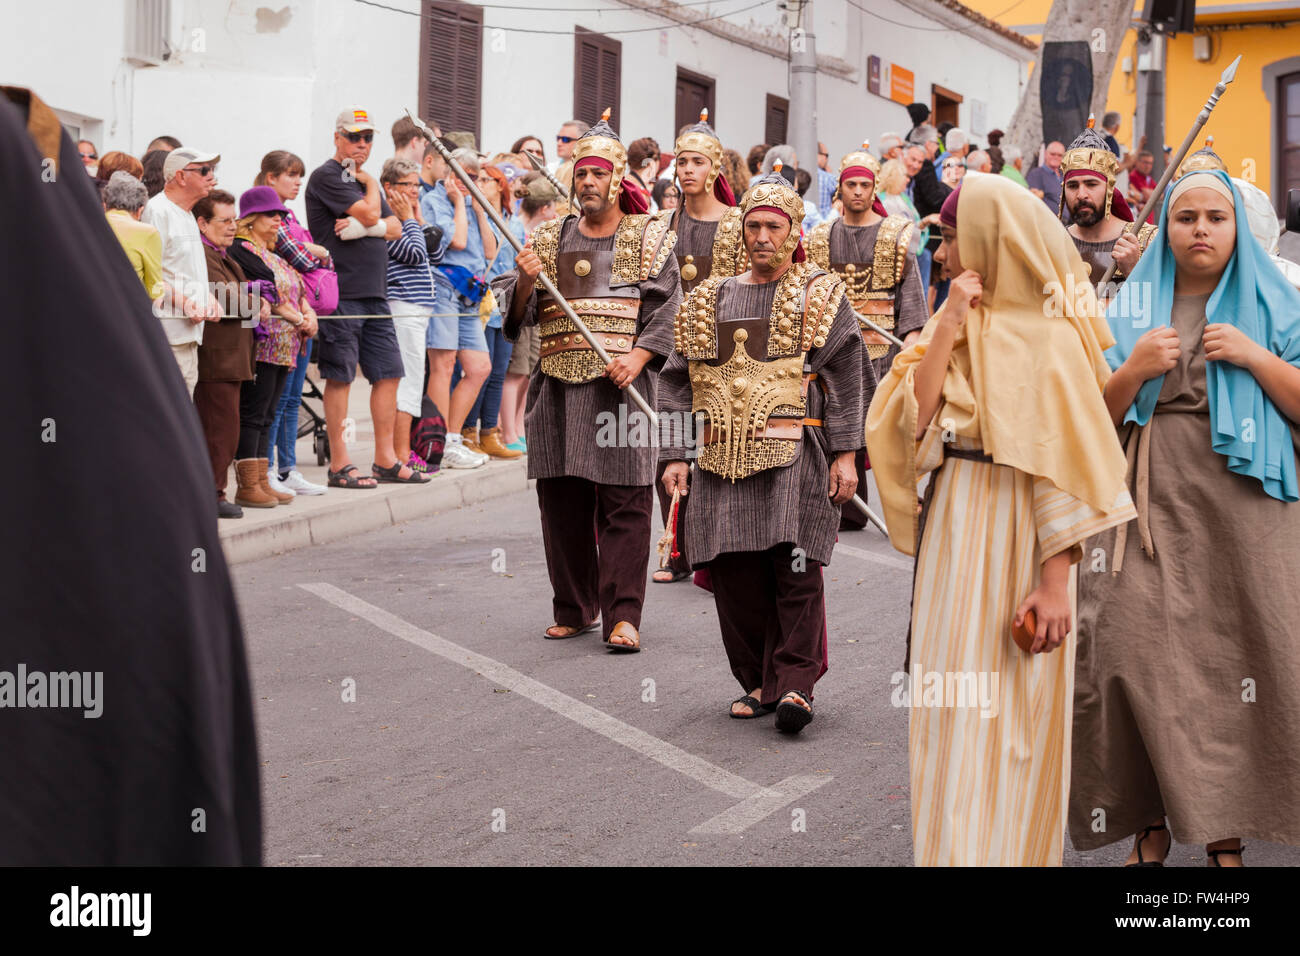 Some of the over 300 amateur actors who partake in the annual Passion Play in Adeje, Tenerife, Canary Islands, Spain. Representa Stock Photo